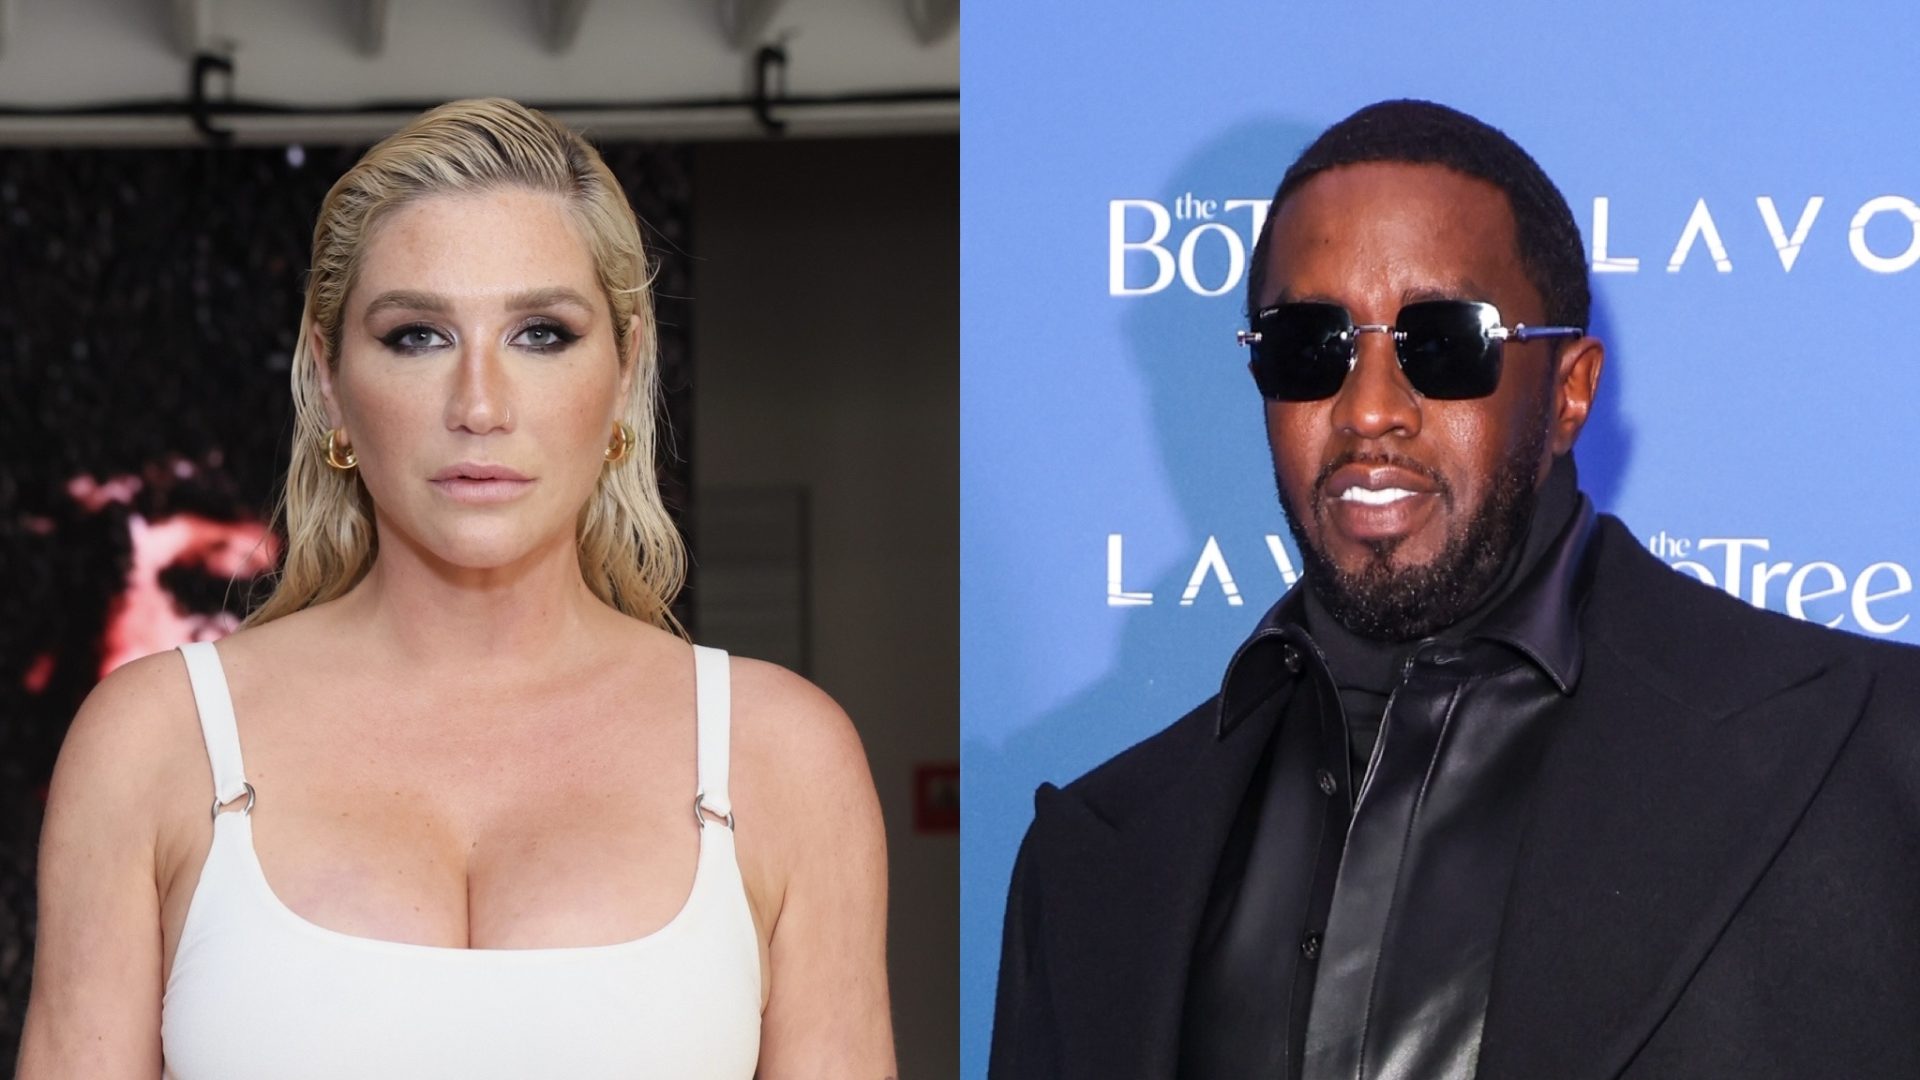 Oop! Kesha Goes Viral After Changing The Lyrics In Her Song ‘TiK ToK’ To Say THIS About Diddy (WATCH) thumbnail